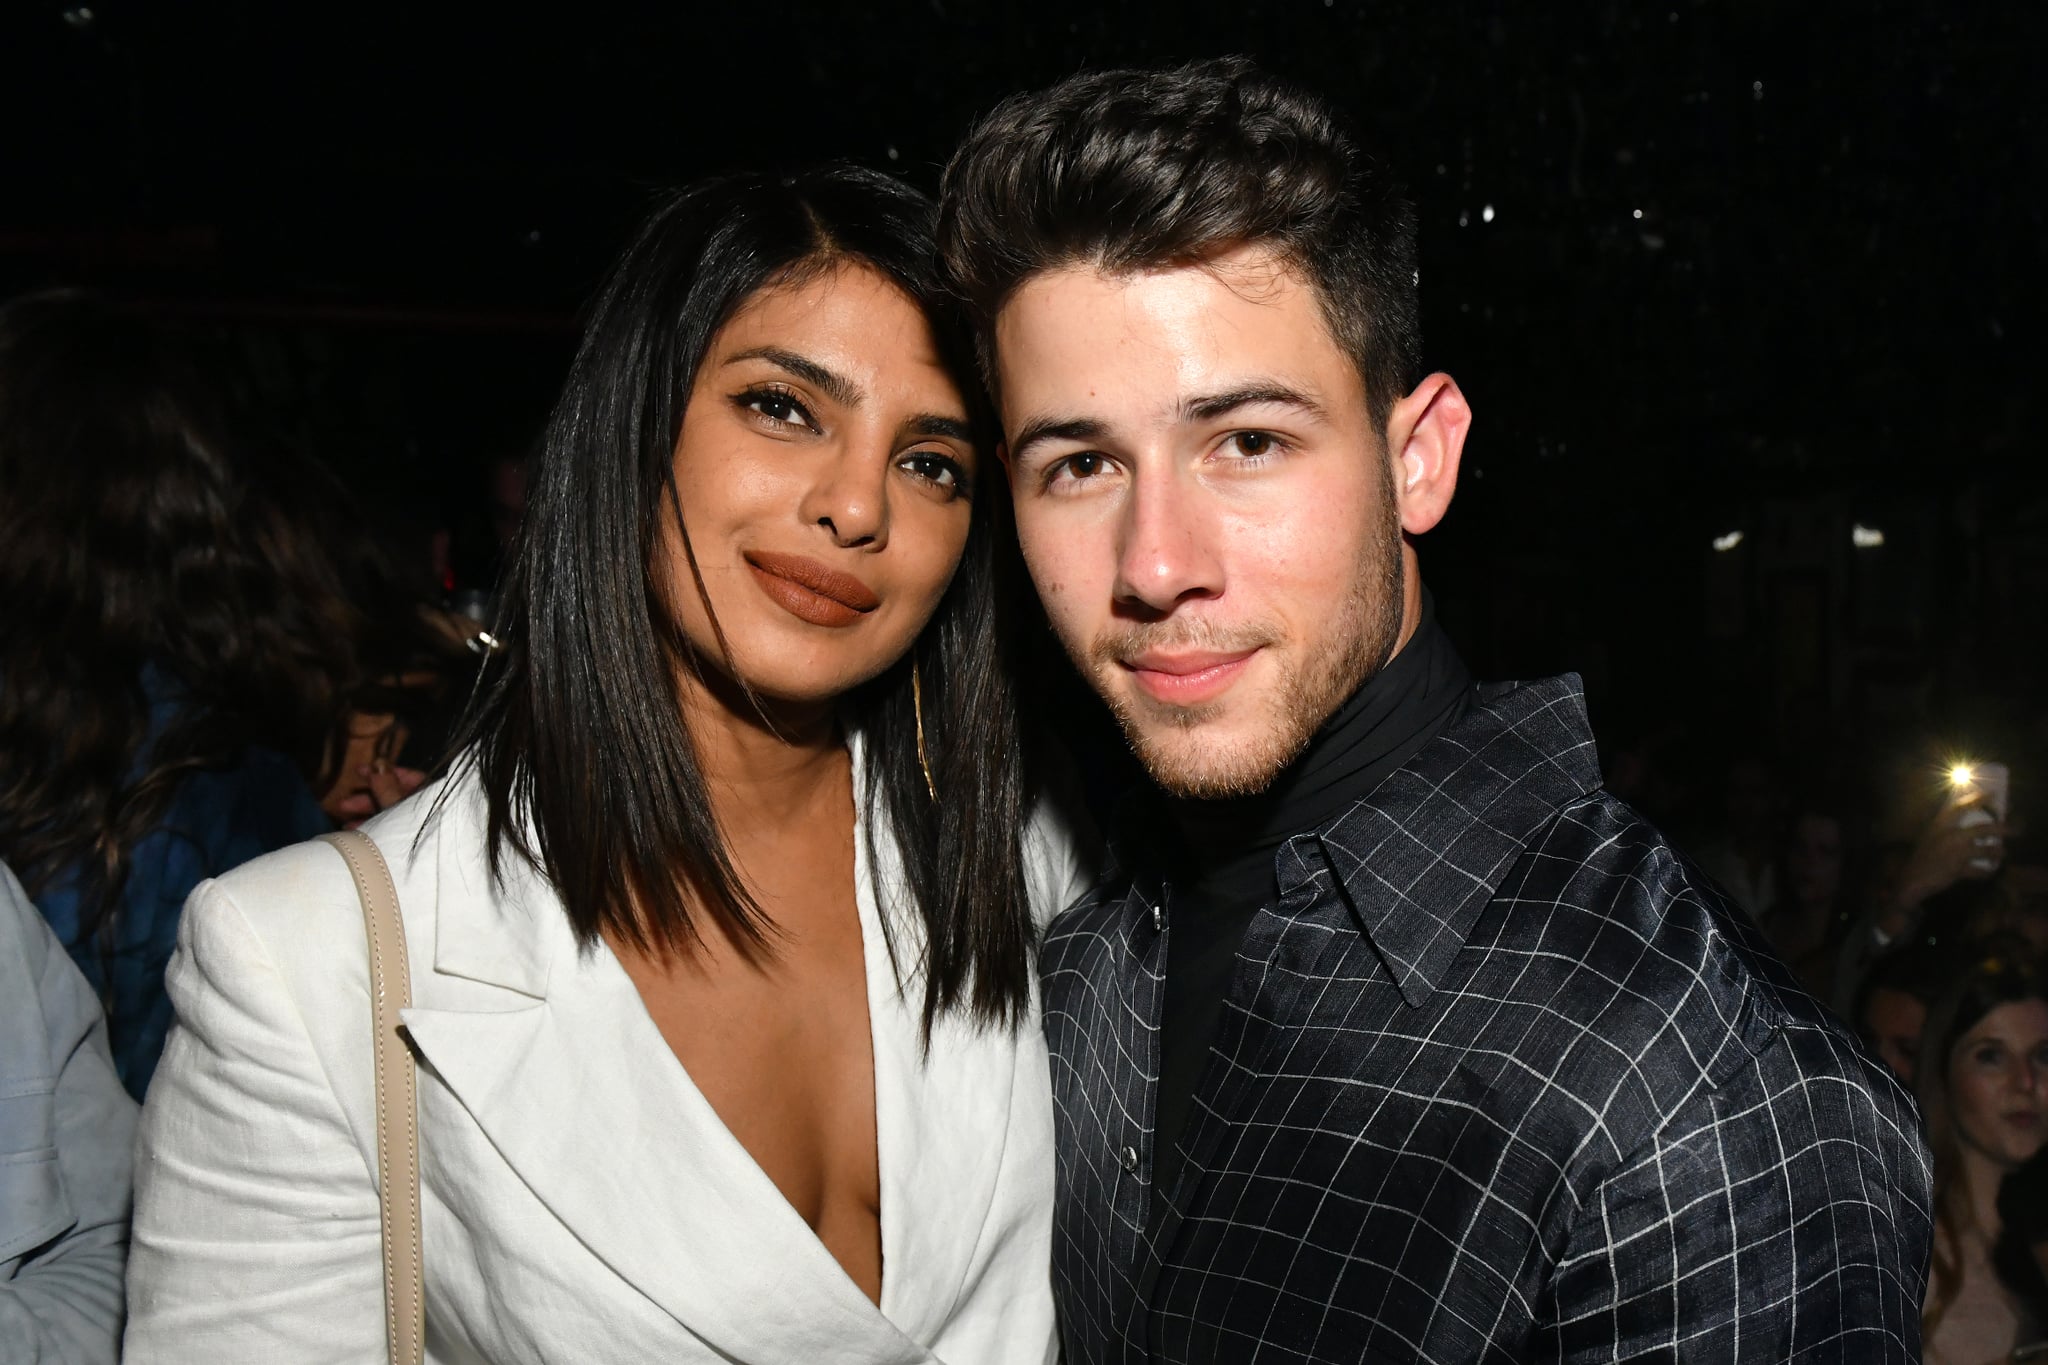 NEW YORK, NEW YORK - AUGUST 29: Priyanka Chopra and Nick Jonas attend the John Varvatos Villa One Tequila Launch Party at John Varvatos Bowery on August 29, 2019 in New York City. (Photo by Craig Barritt/Getty Images for John Varvatos)